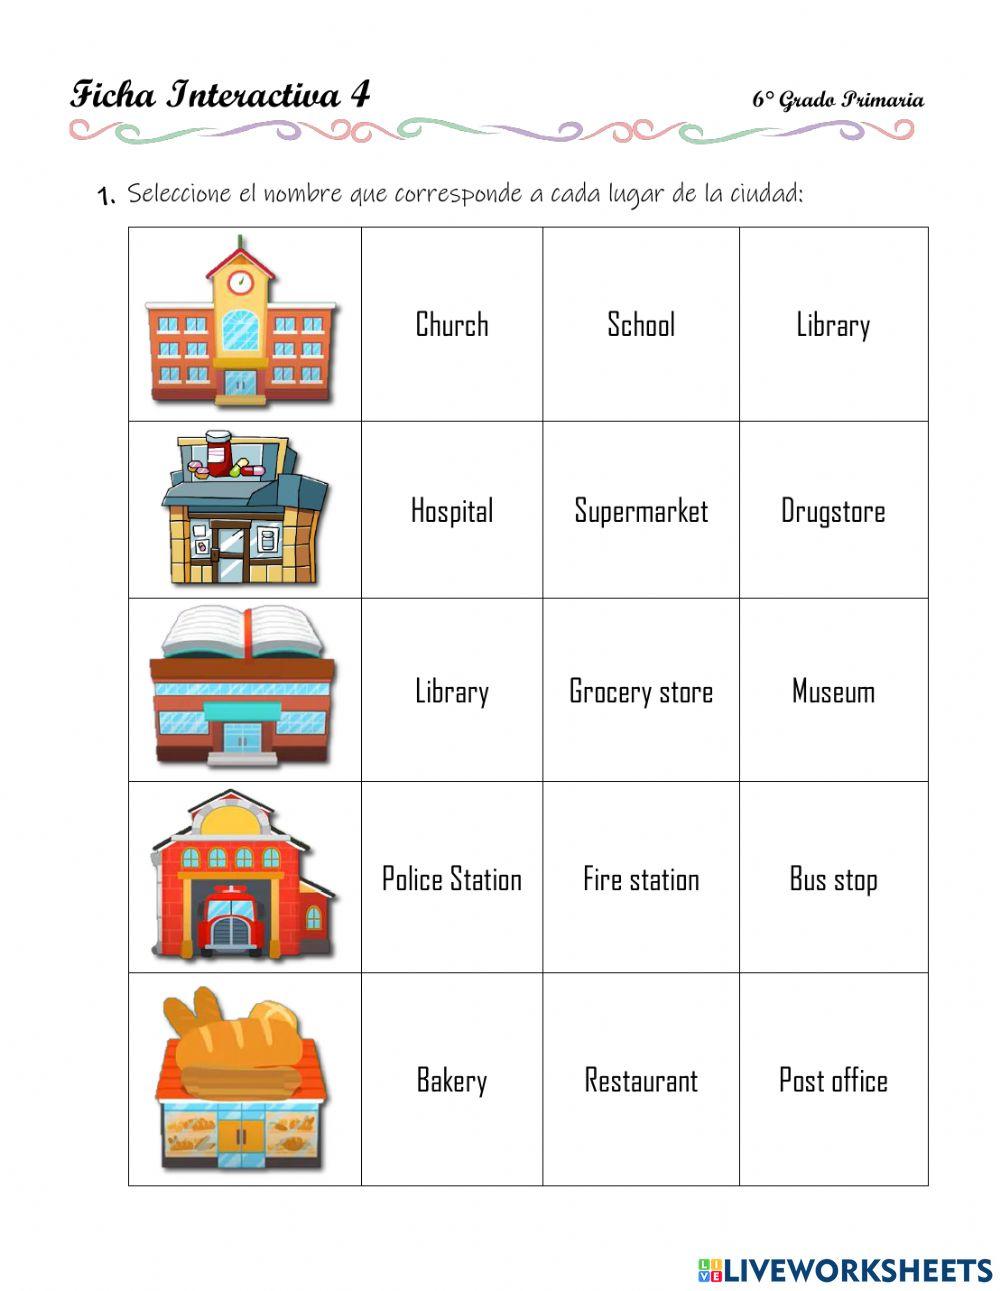 Review - city, prepositions, numbers, demonstrative adjectives - 2.10.6°